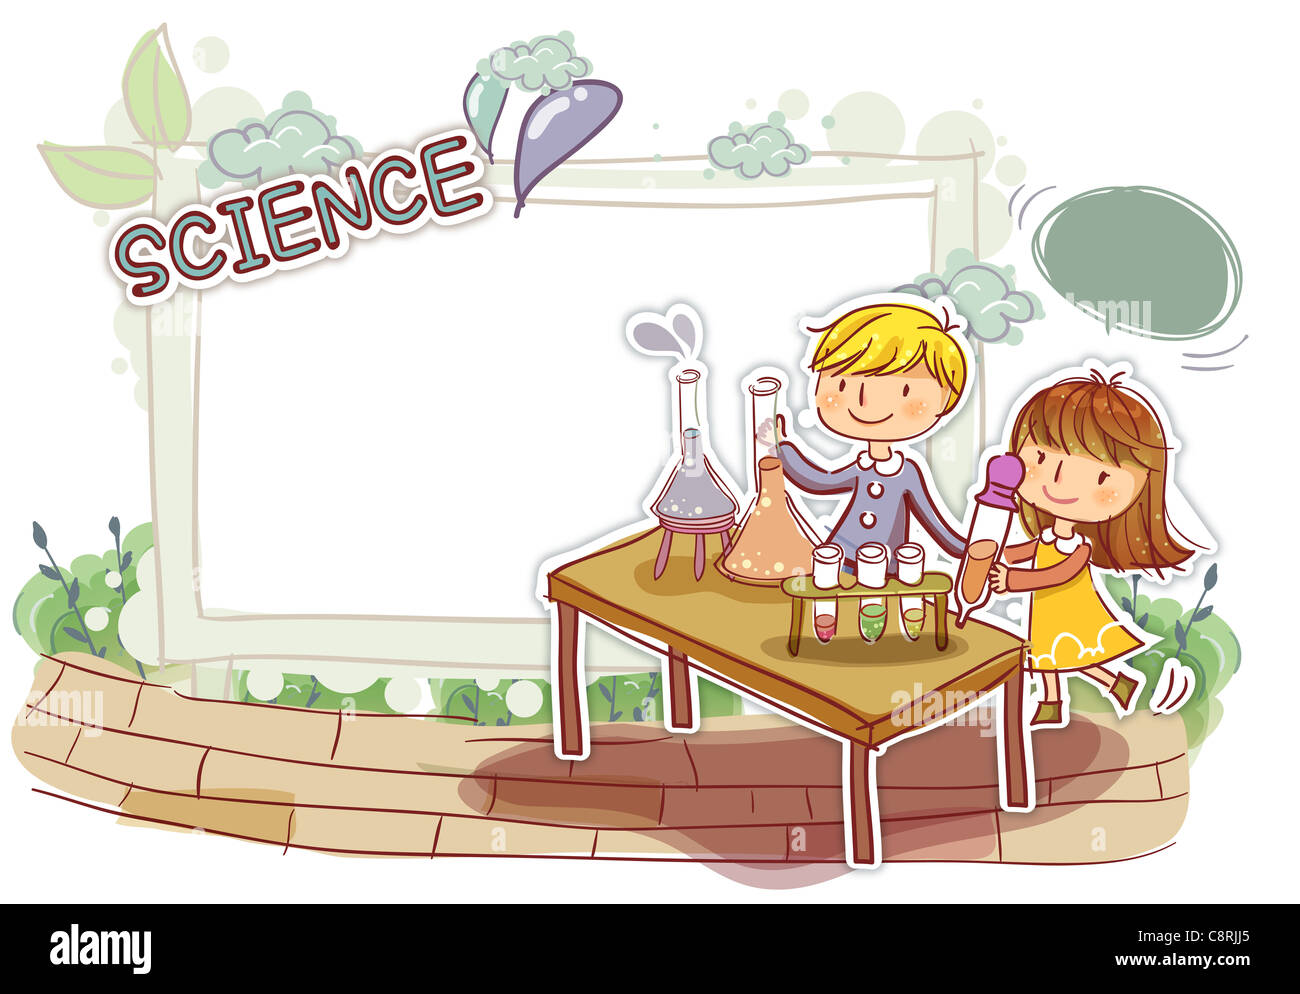 Illustration of children in science class Stock Photo